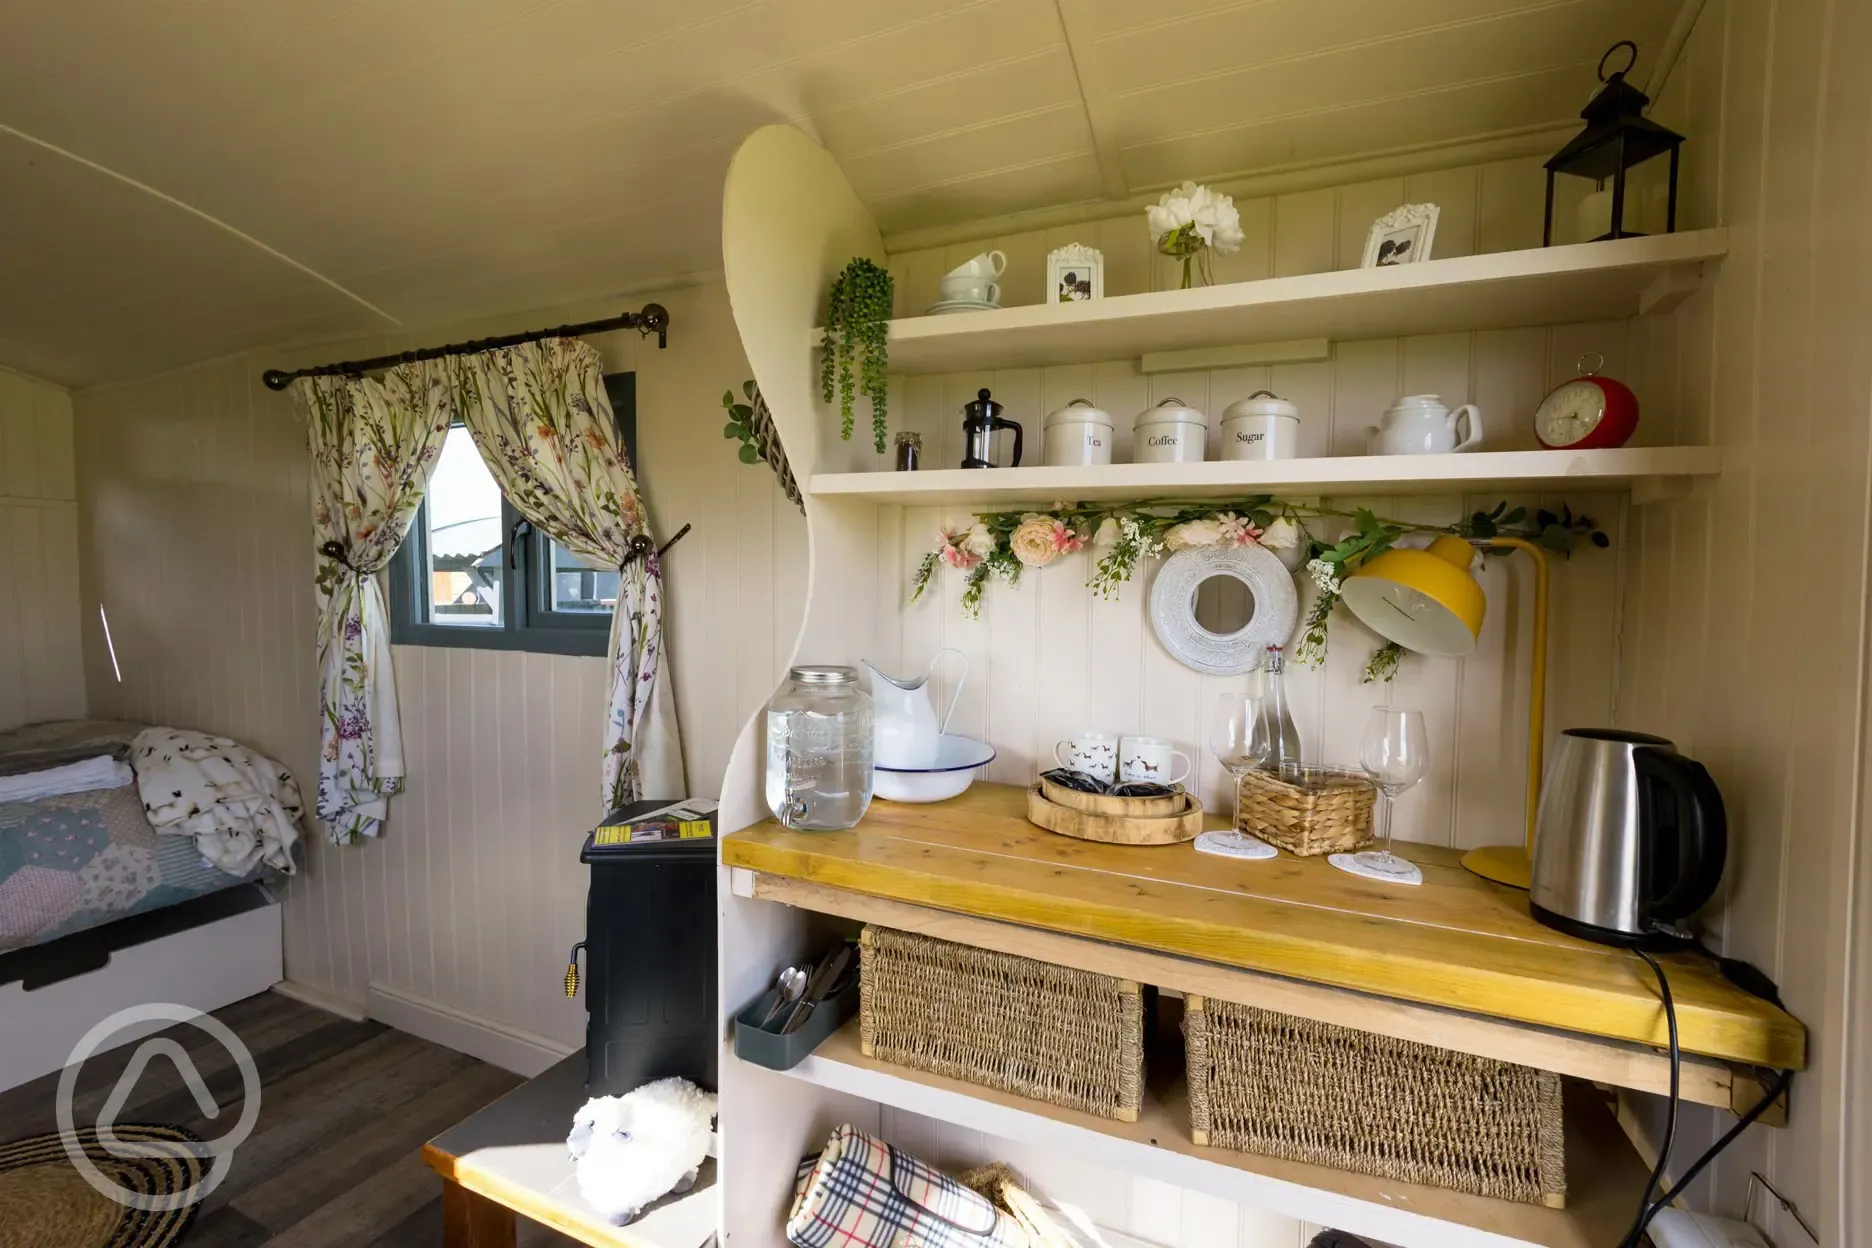 Shepherds huts have all essential pots, kettle and bedding